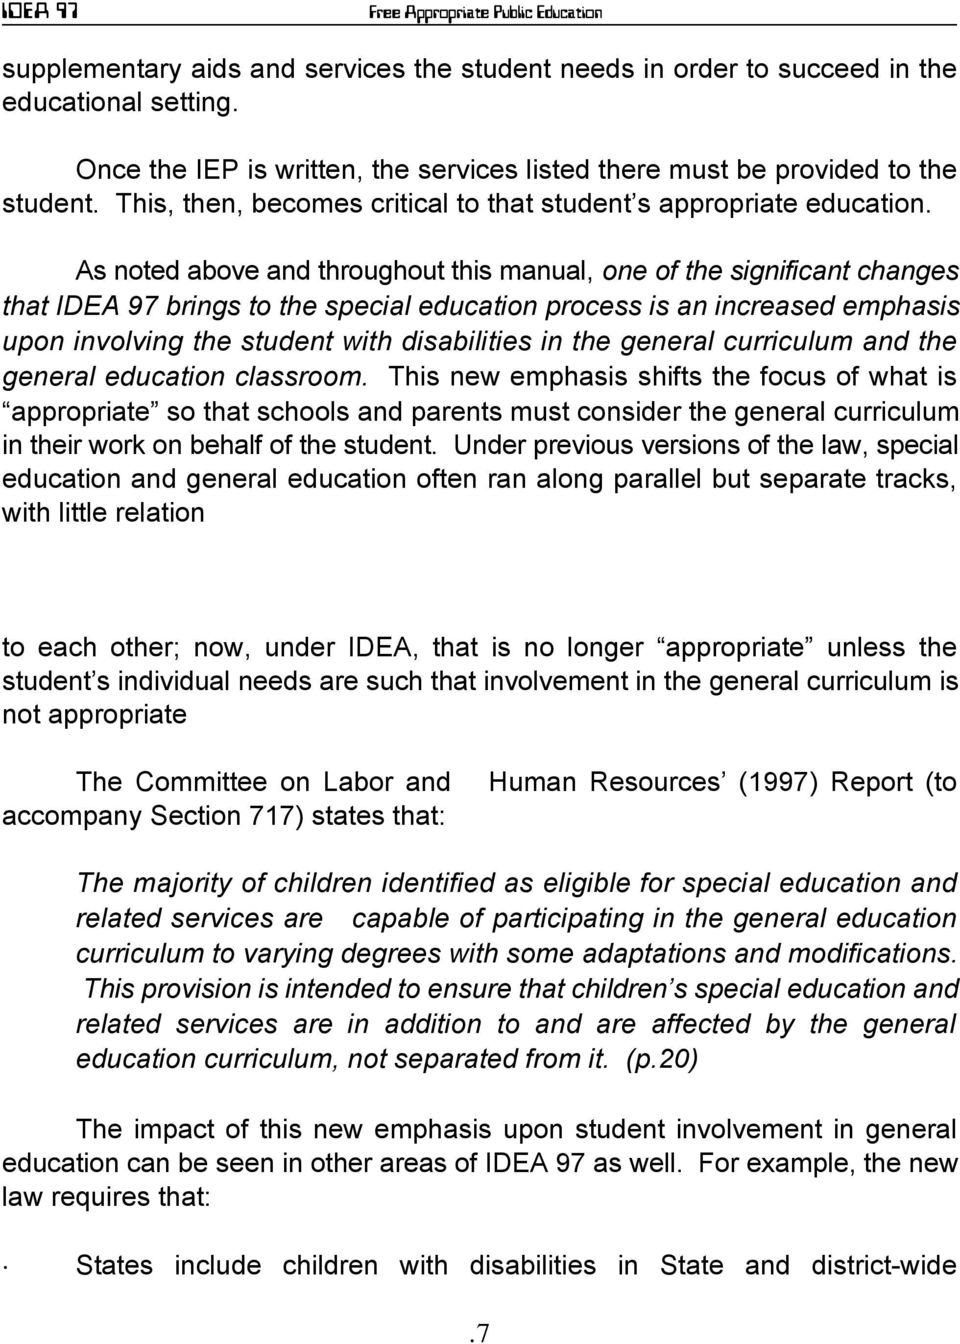 As noted above and throughout this manual, one of the significant changes that IDEA 97 brings to the special education process is an increased emphasis upon involving the student with disabilities in